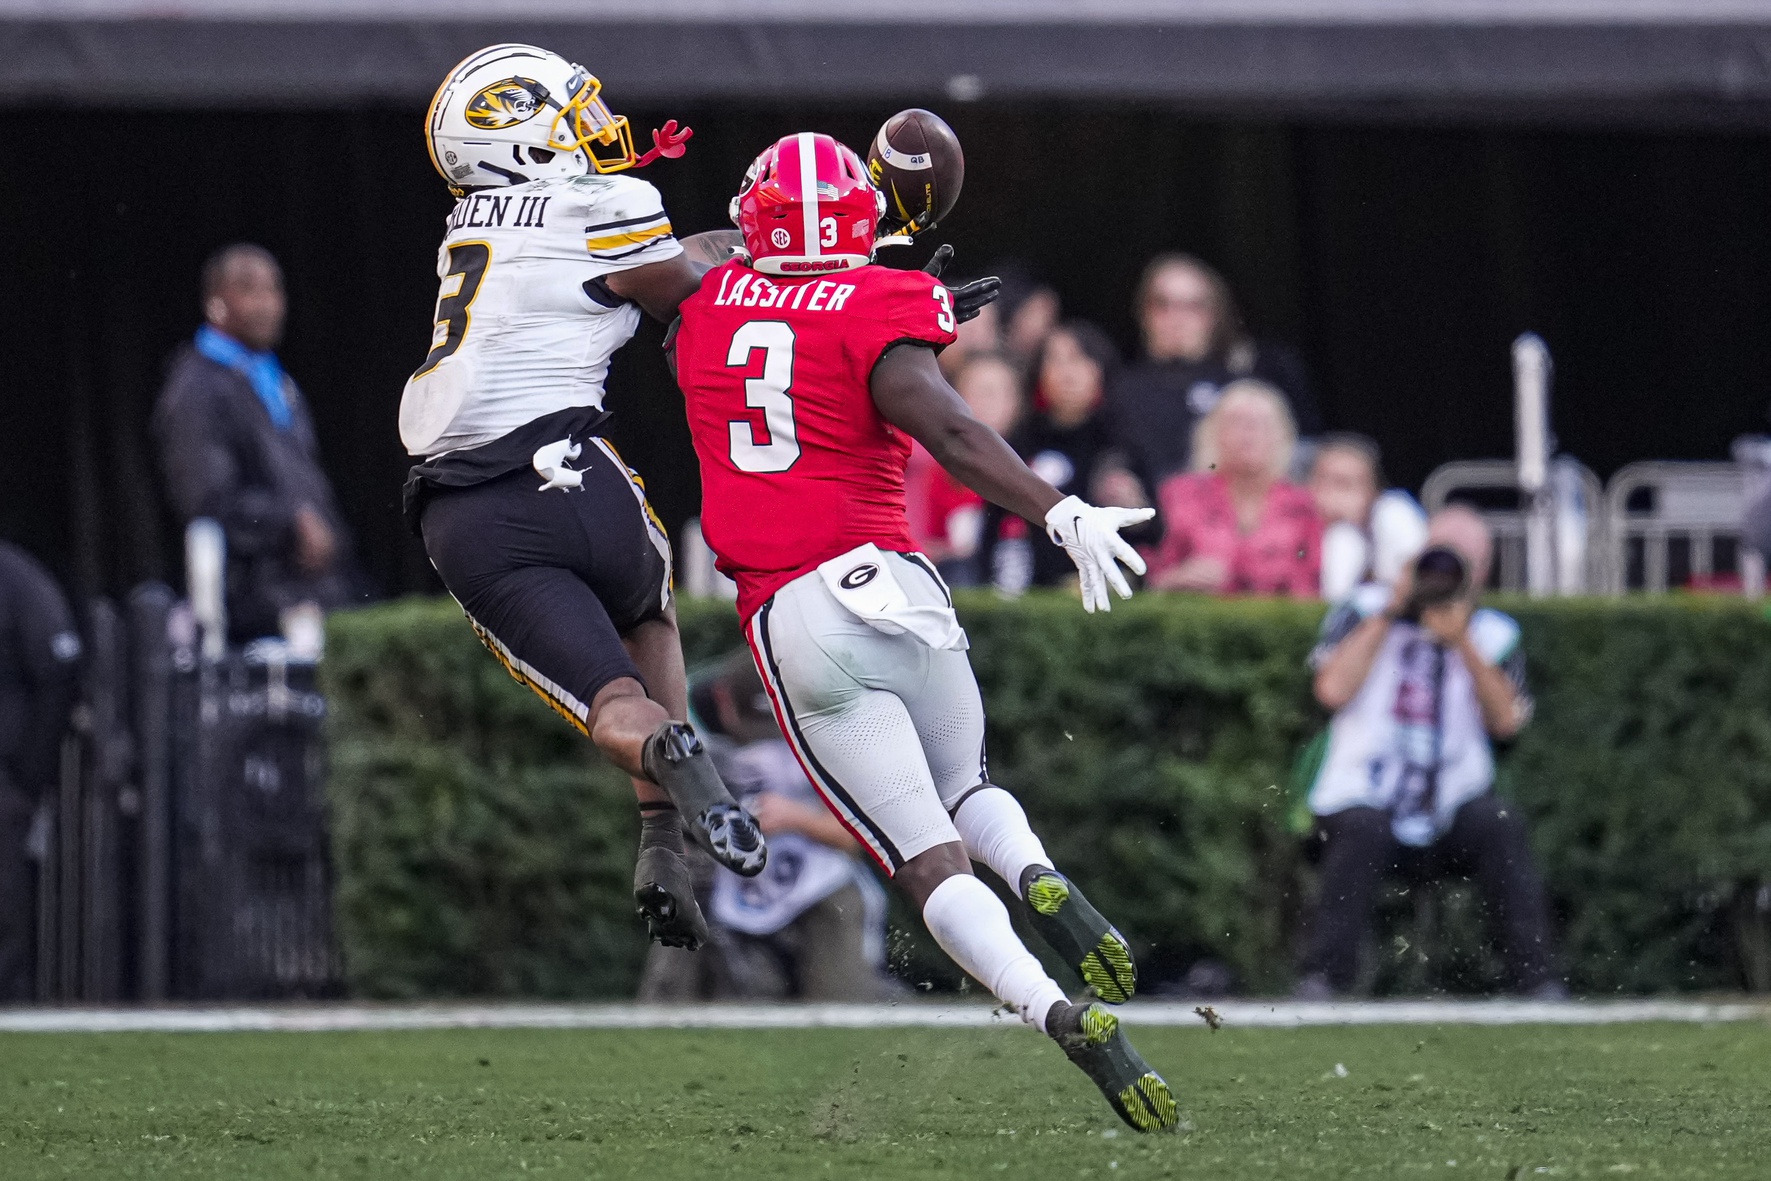 Nov 4, 2023; Athens, Georgia, USA; Georgia Bulldogs defensive back Kamari Lassiter (3) breaks up a pass intended for Missouri Tigers wide receiver Luther Burden III (3) during the second half at Sanford Stadium.